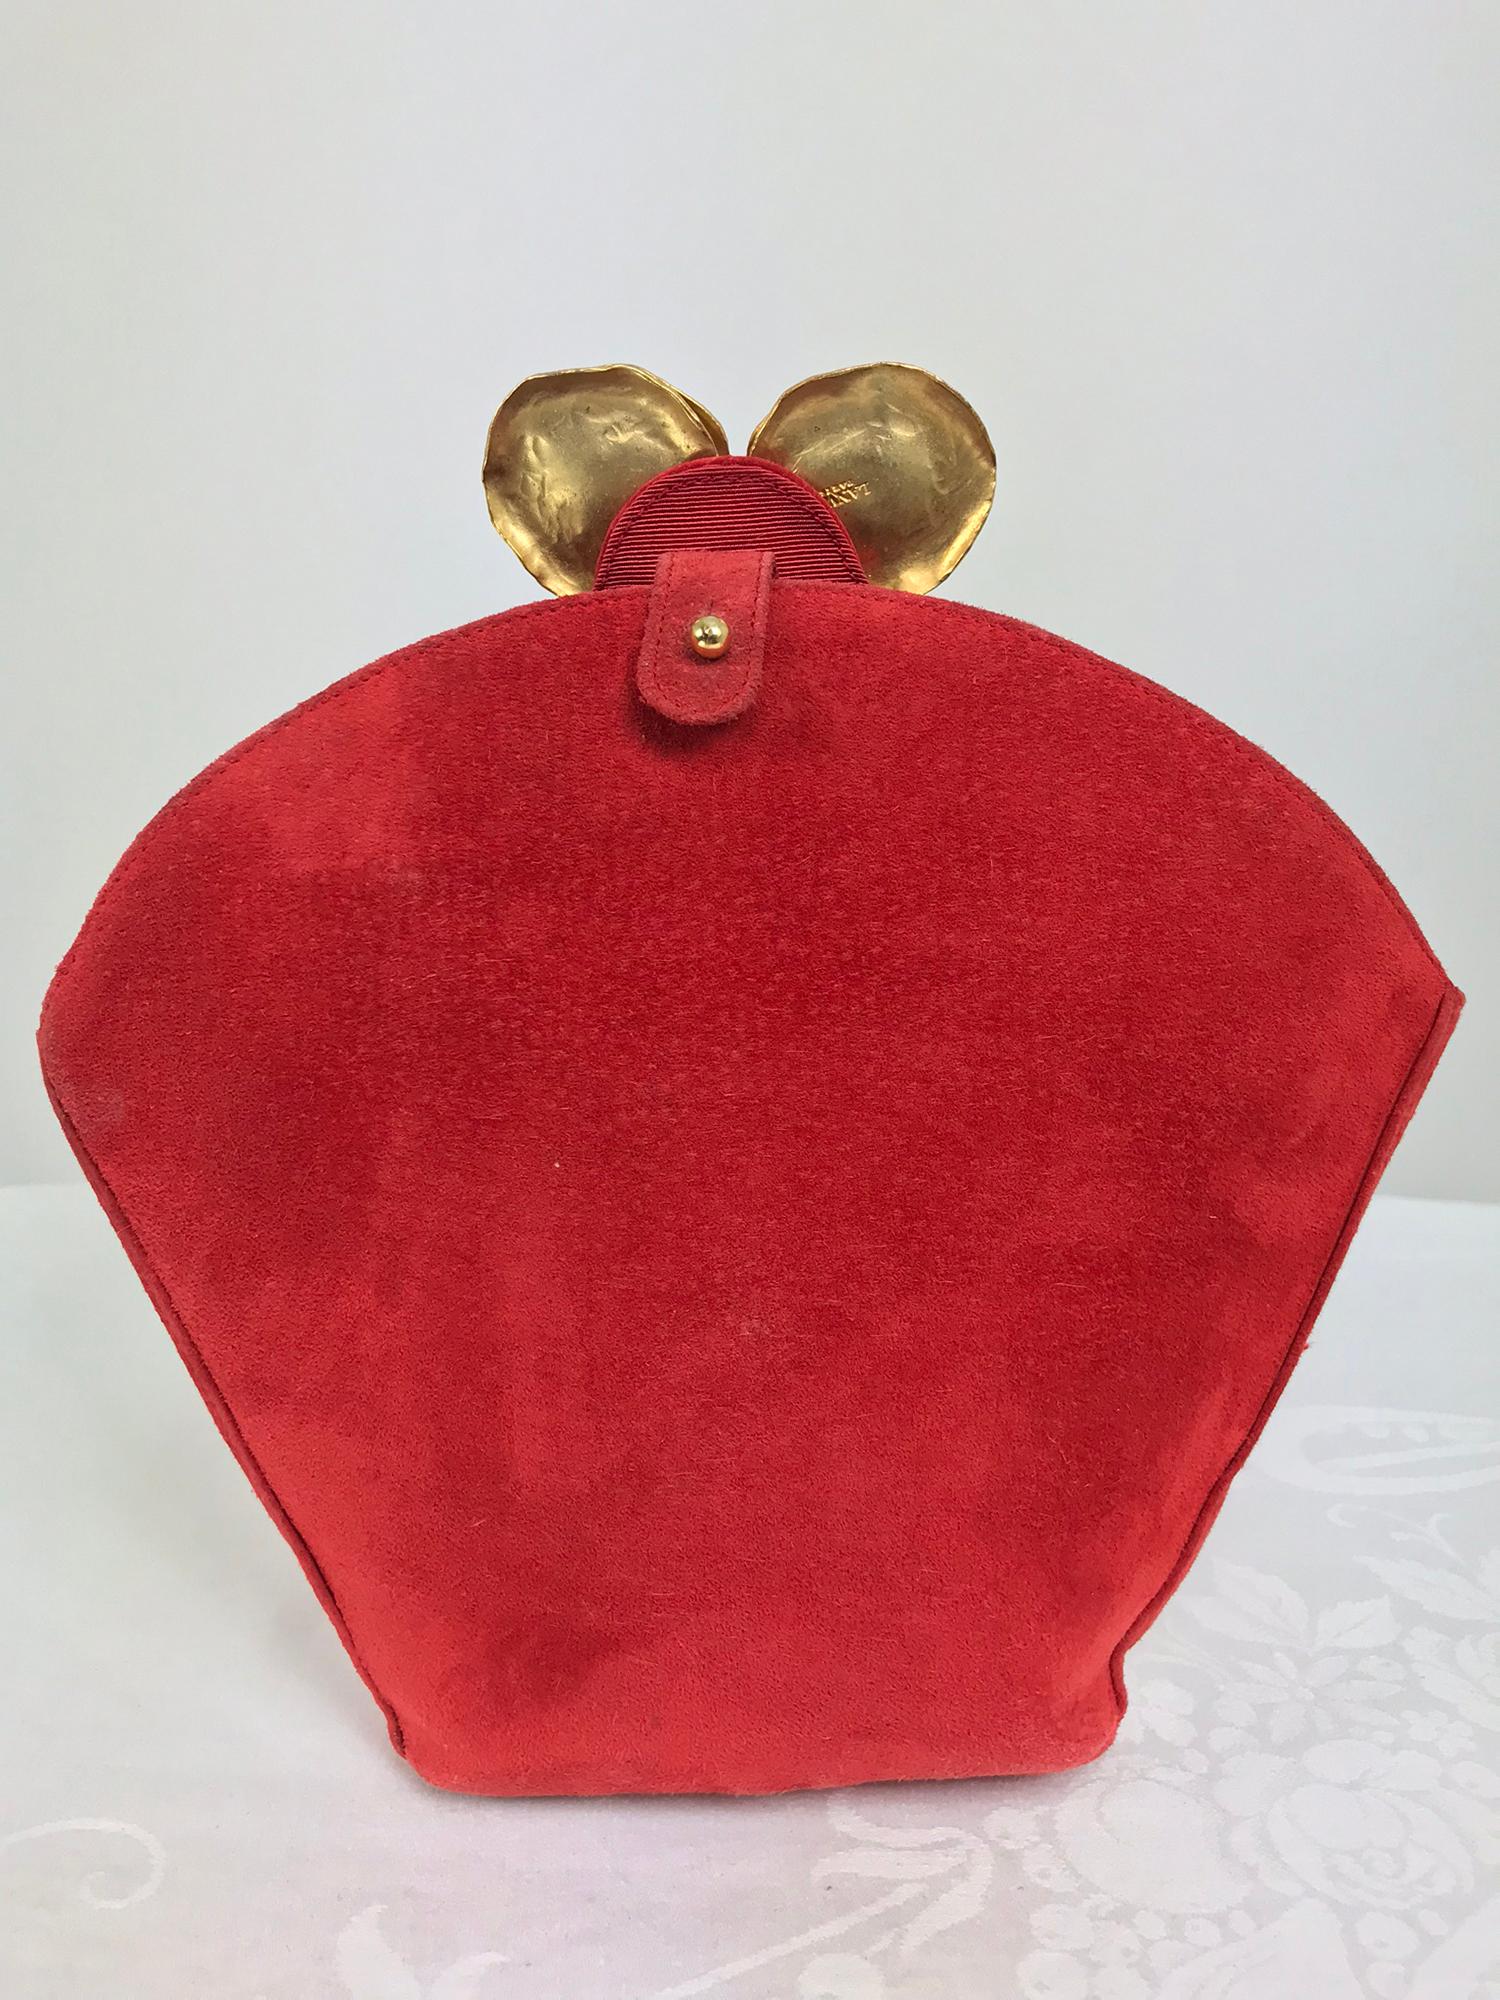 Lanvin coral red flower pot evening bag, a rare bag possibly from the 1980s, This beautiful bag in coral red suede is shaped like a three dimensional fan, the bottom is oval, the front and back are attached at the sides with narrow strips of suede.